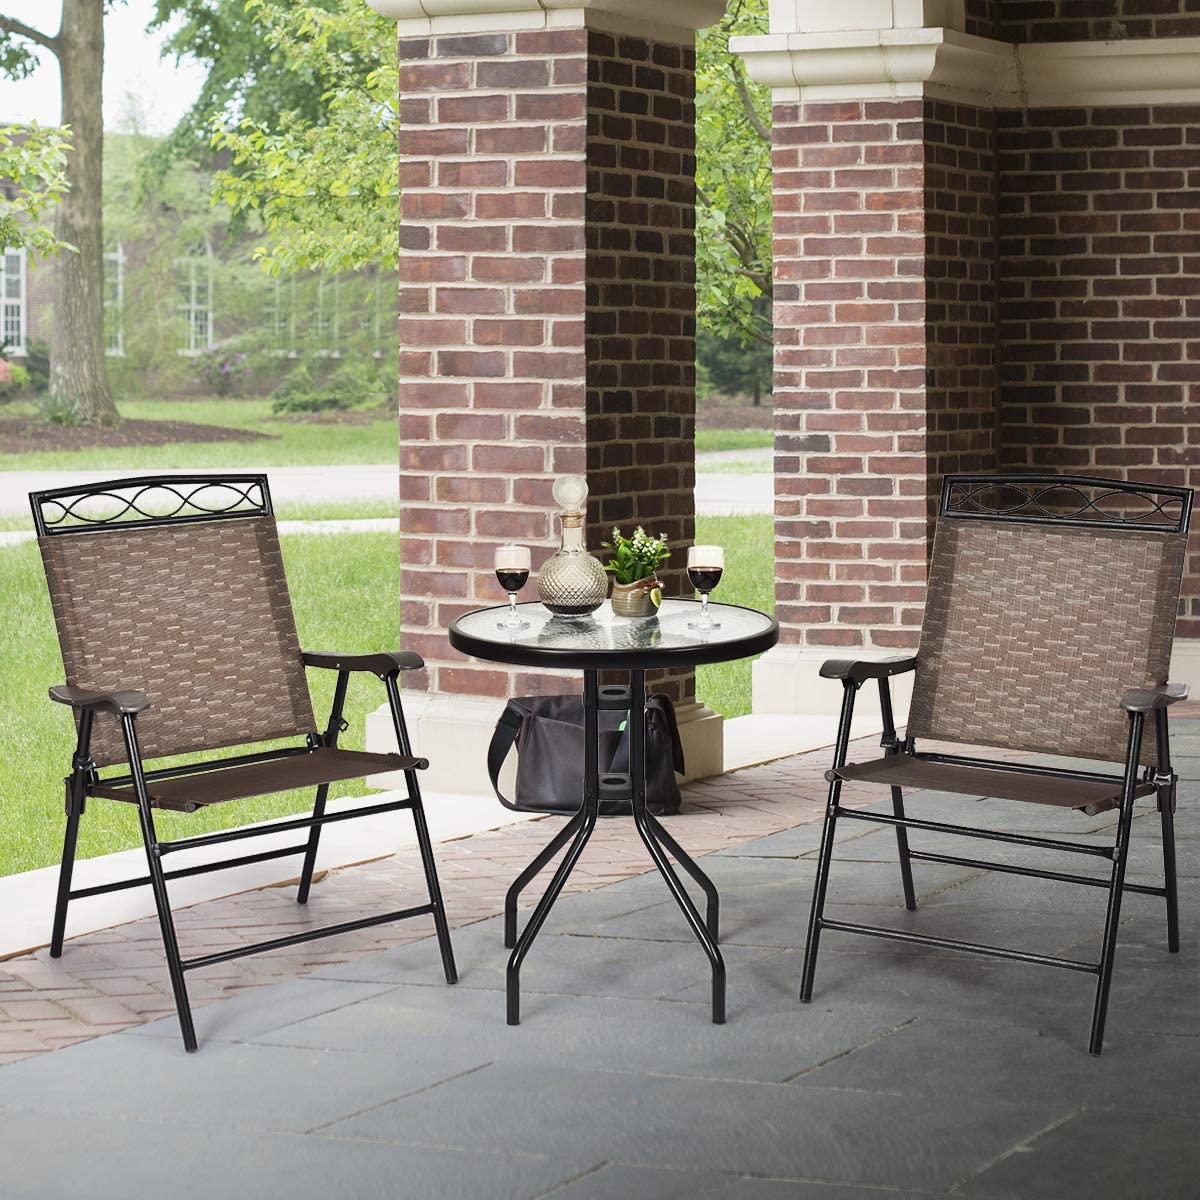 Giantex Patio Dining Set Round Glass Table with 2 Patio Folding Chairs(Brown)